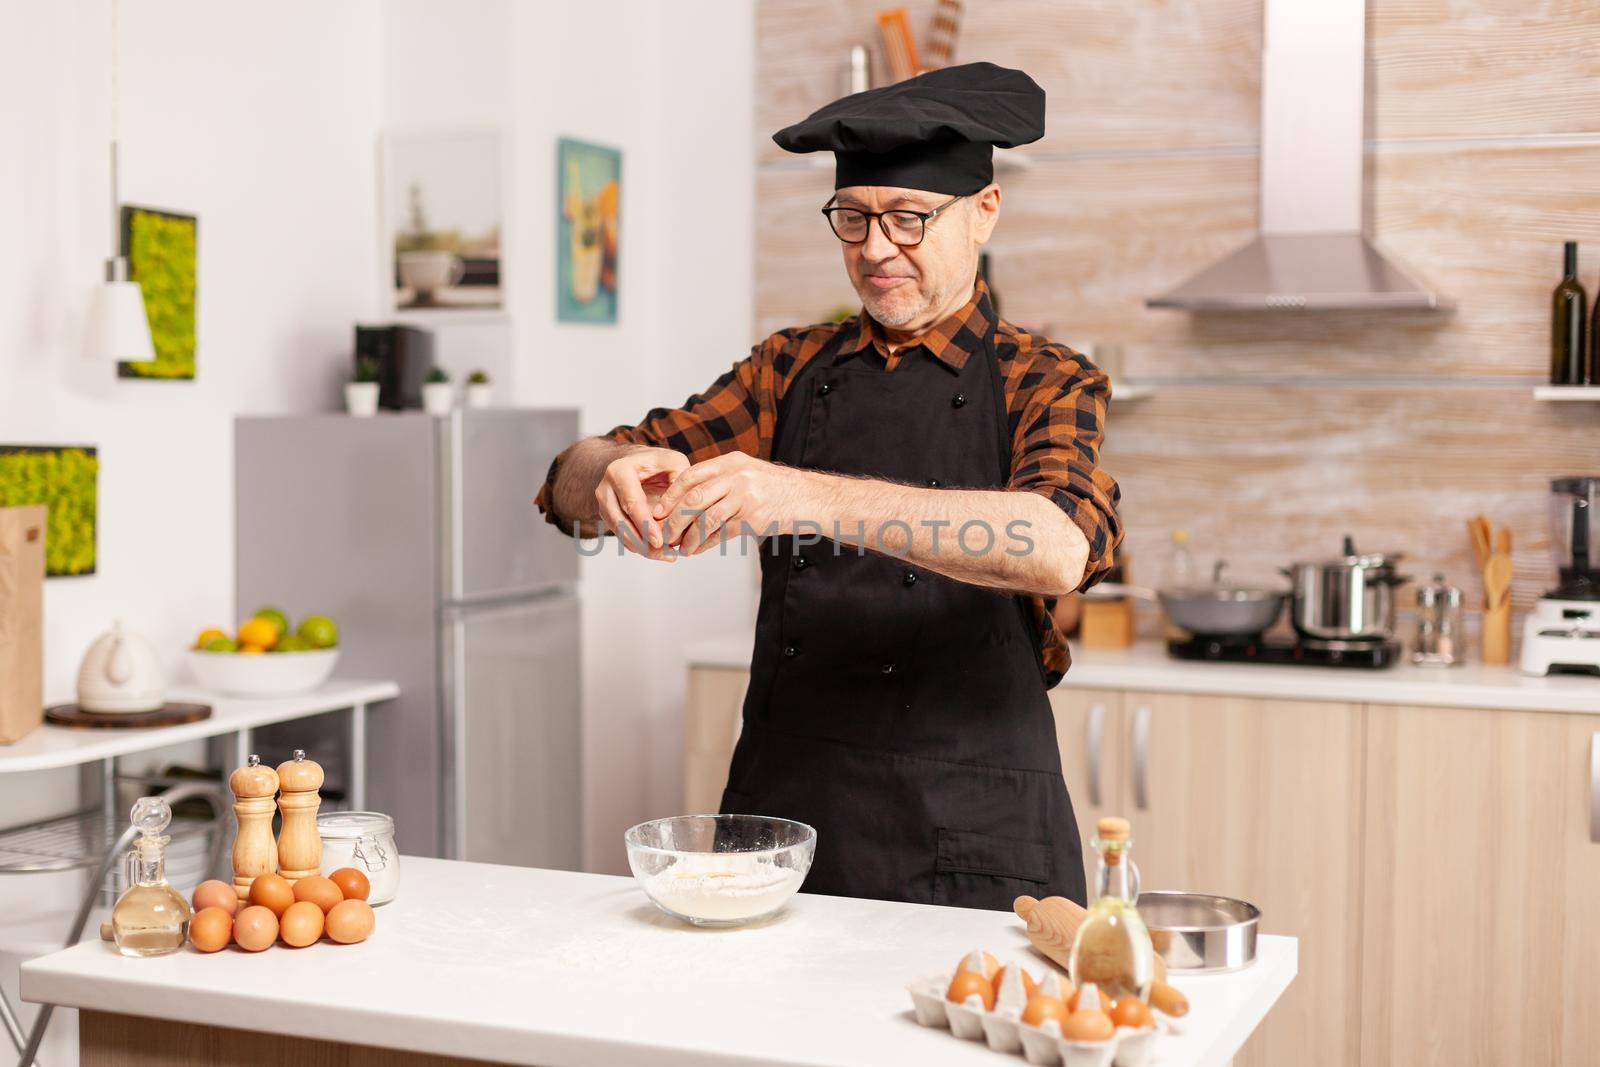 Elderly man cracking eggs over wheat flour while preparing delicious food. Elderly pastry chef cracking egg on glass bowl for cake recipe in kitchen, mixing by hand, kneading ingredients prreparing homemade cake